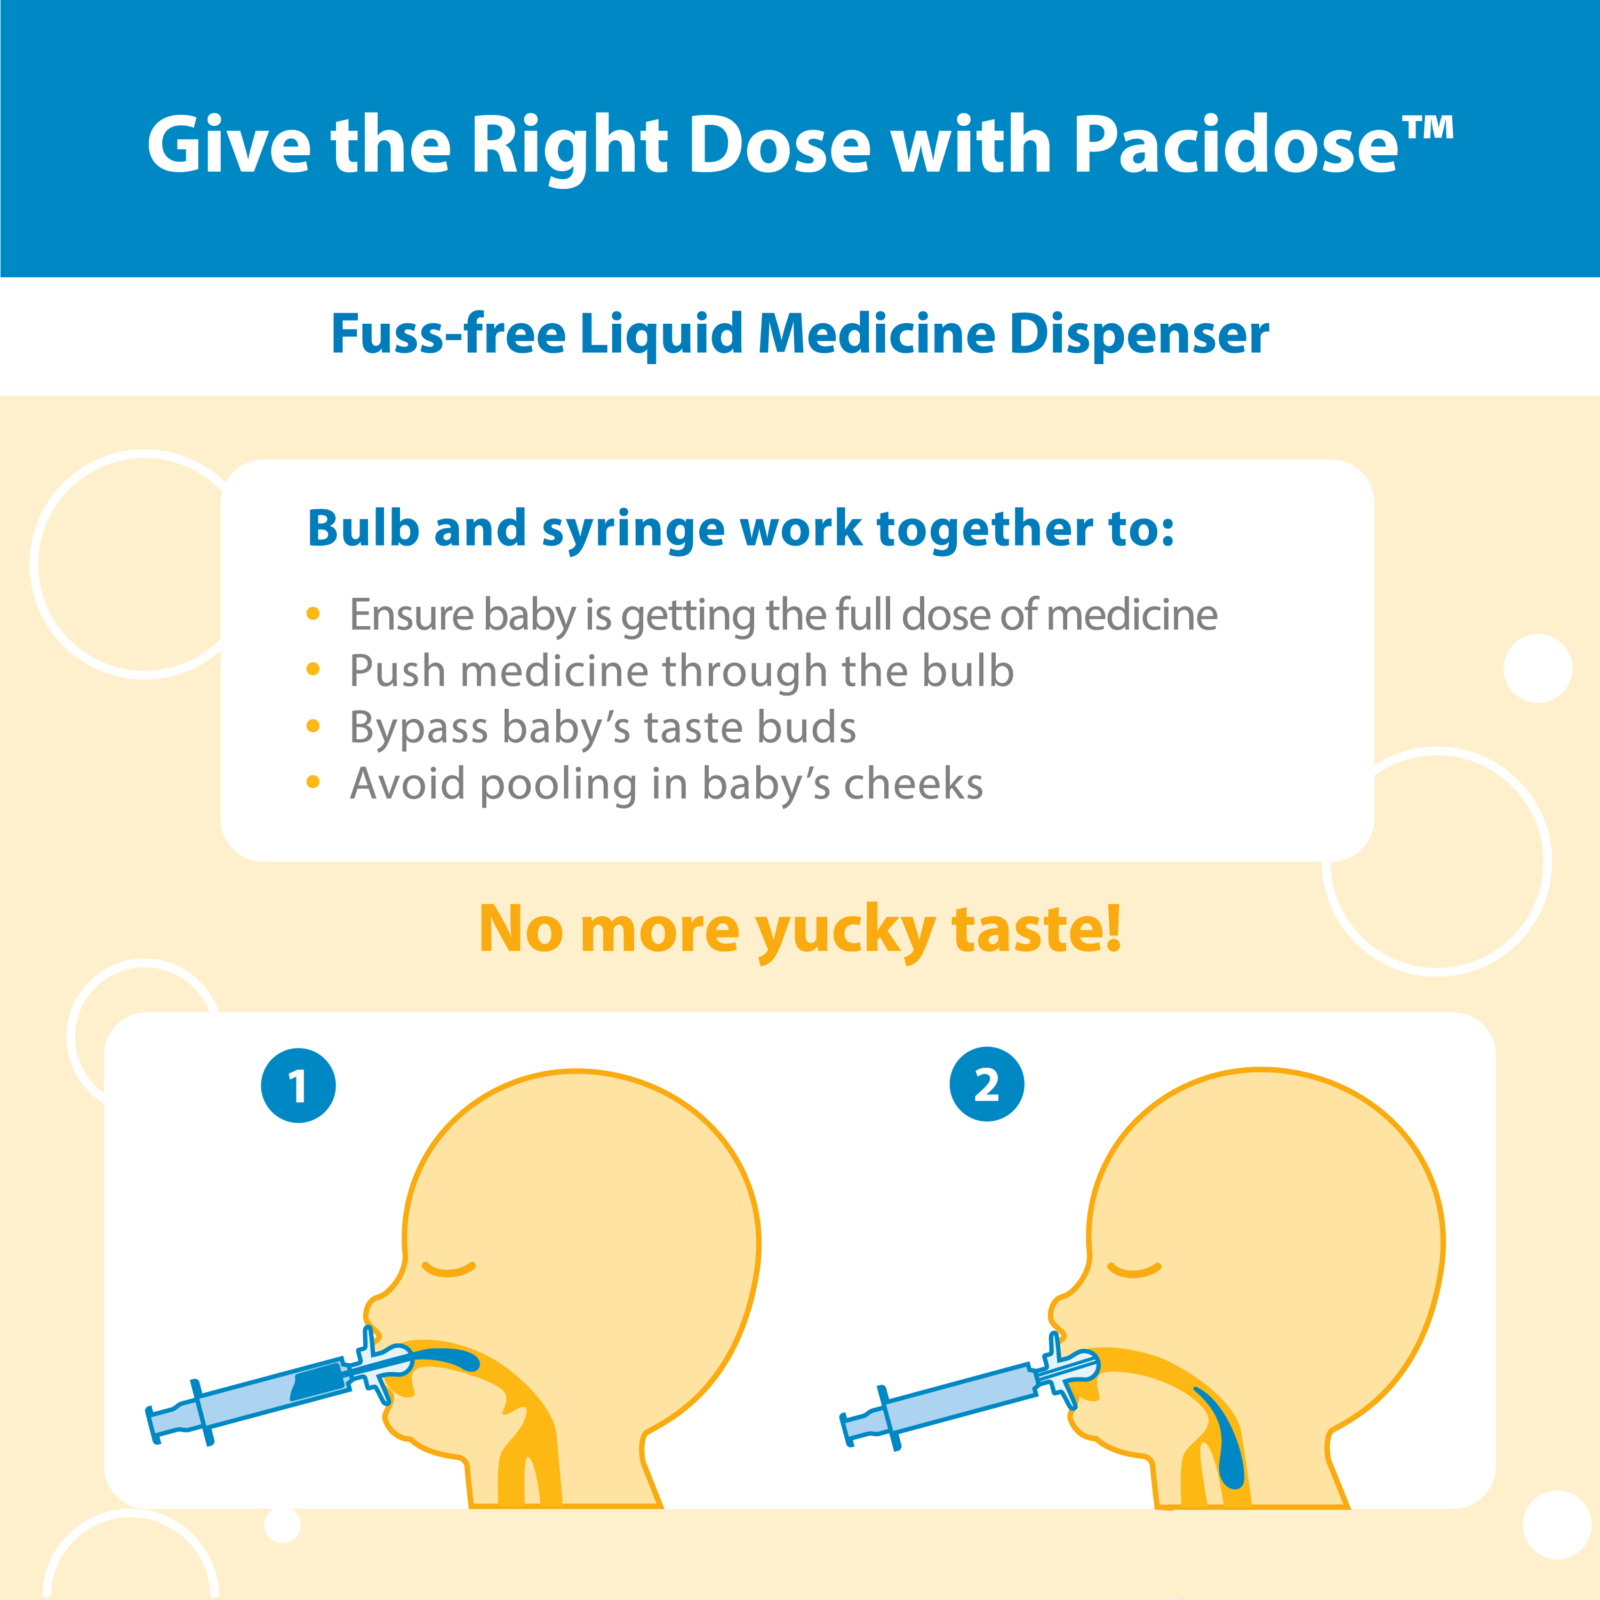 Give the Right Dose with Pacidose™. Fuss free Liquid Medicine Dispenser. Bulb and syringe work together to: Ensure baby is getting the full dose of medicine. Push medicine through the bulb. Bypass baby’s taste buds. Avoid pooling in baby’s cheeks. No more yucky taste!